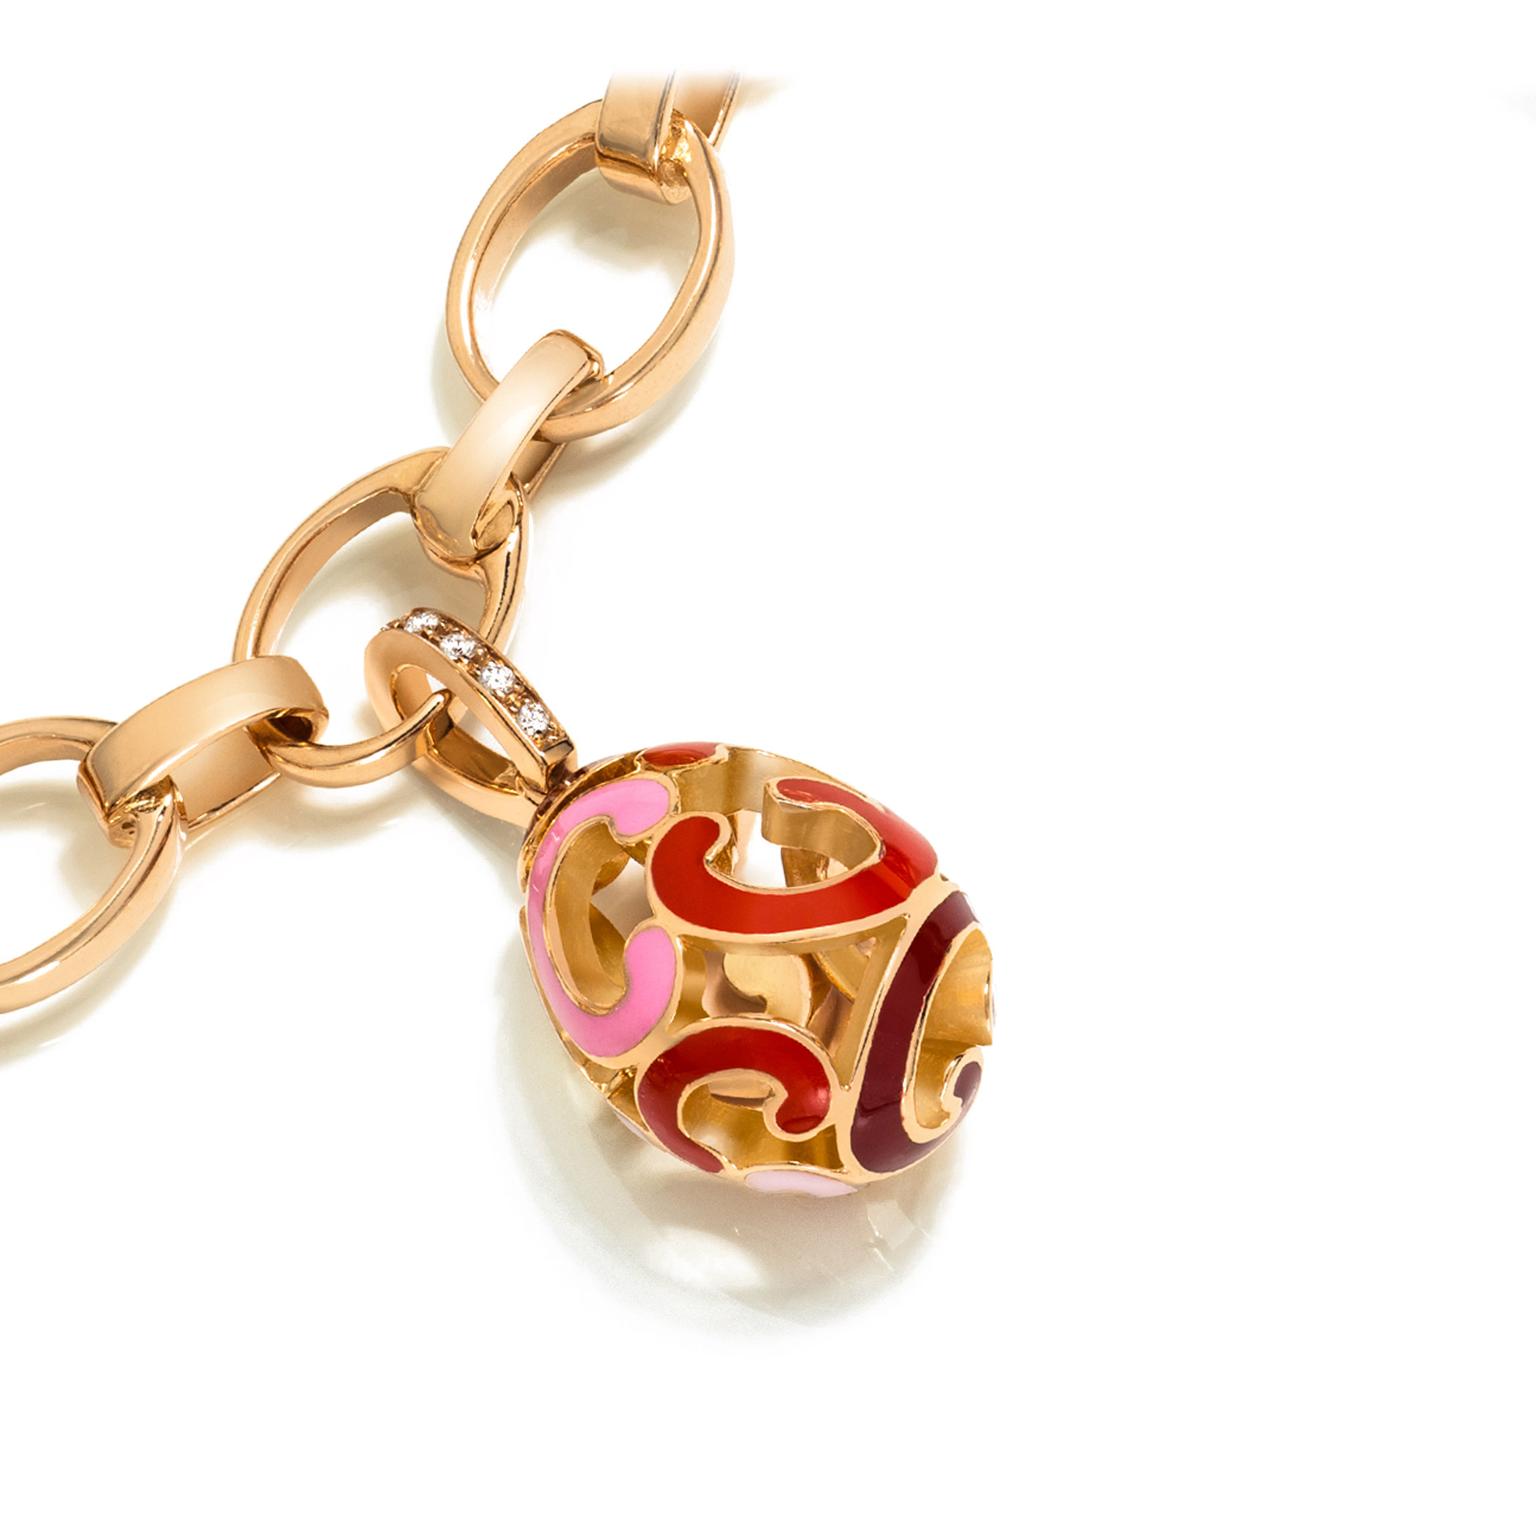 Faberge-Rose-Charm-zoom